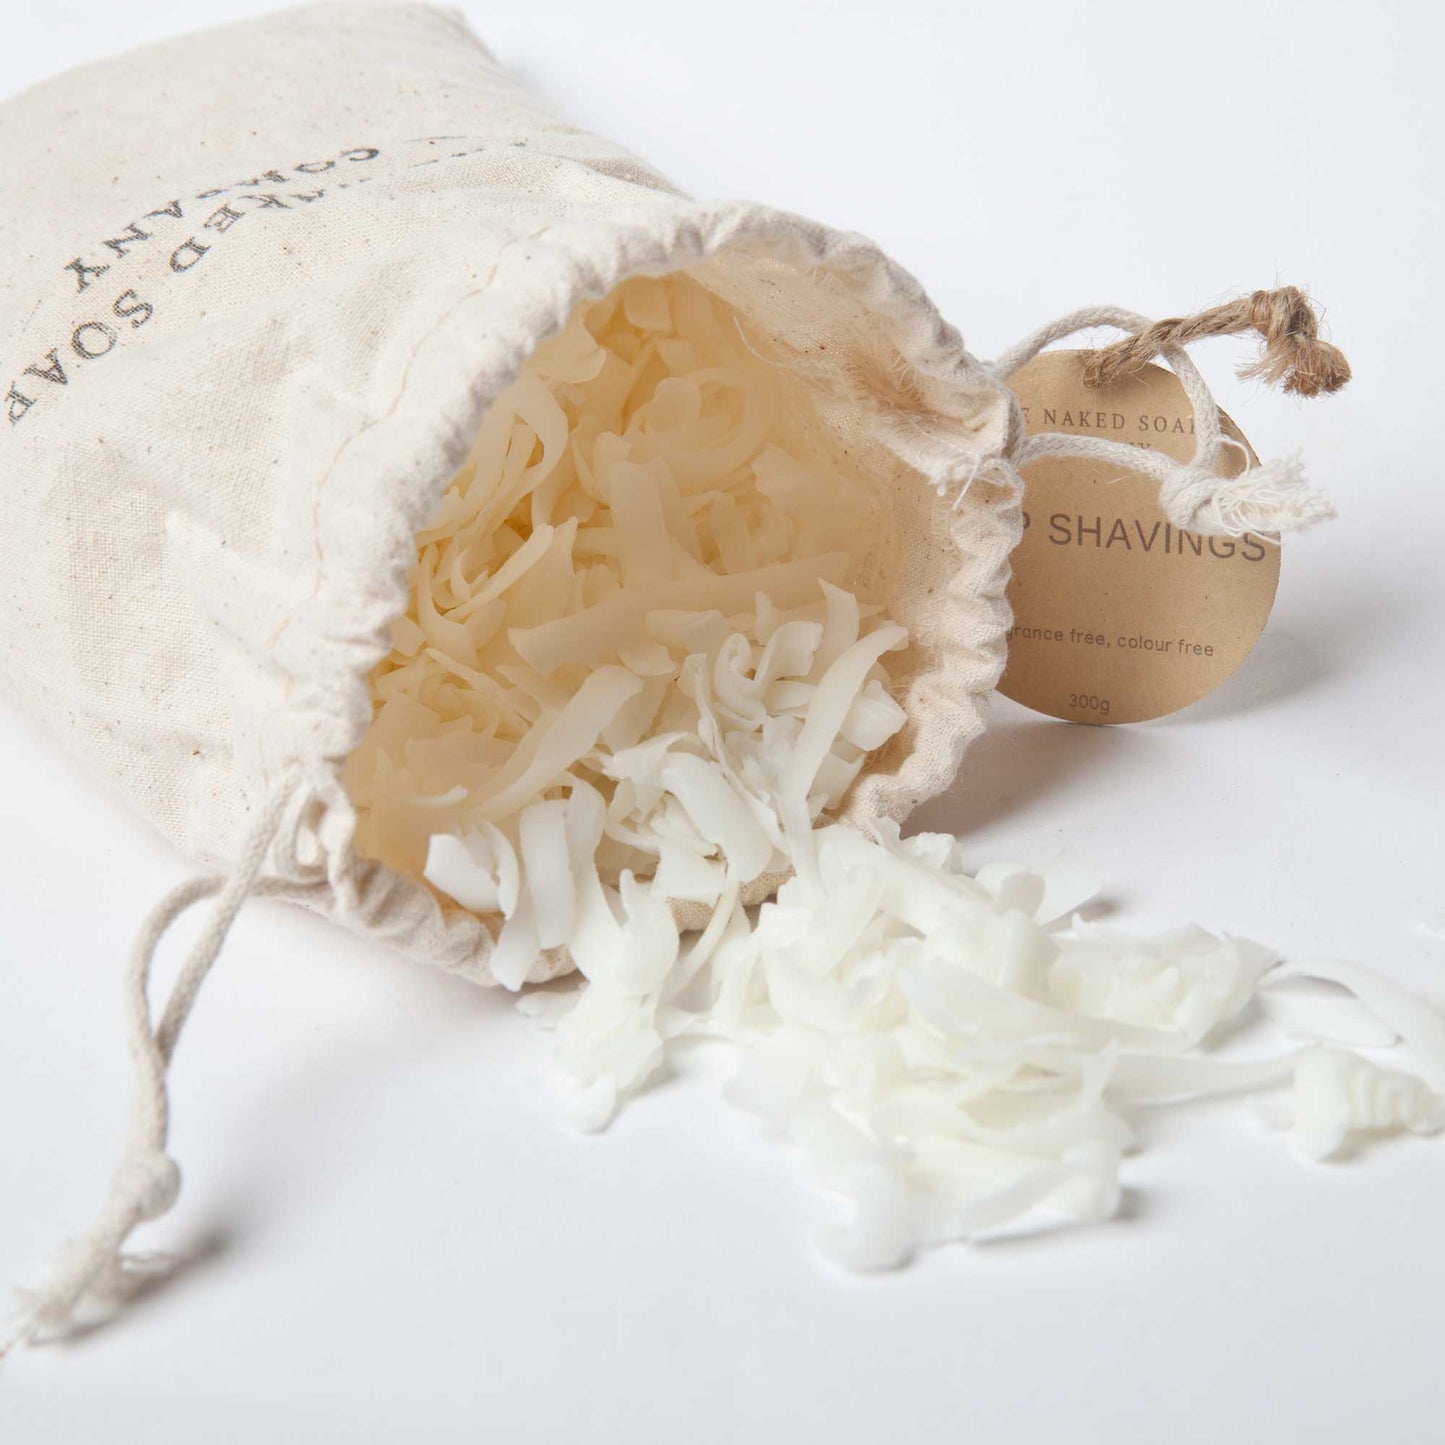 Cotton Canvas bag of scattered all natural soap shavings.